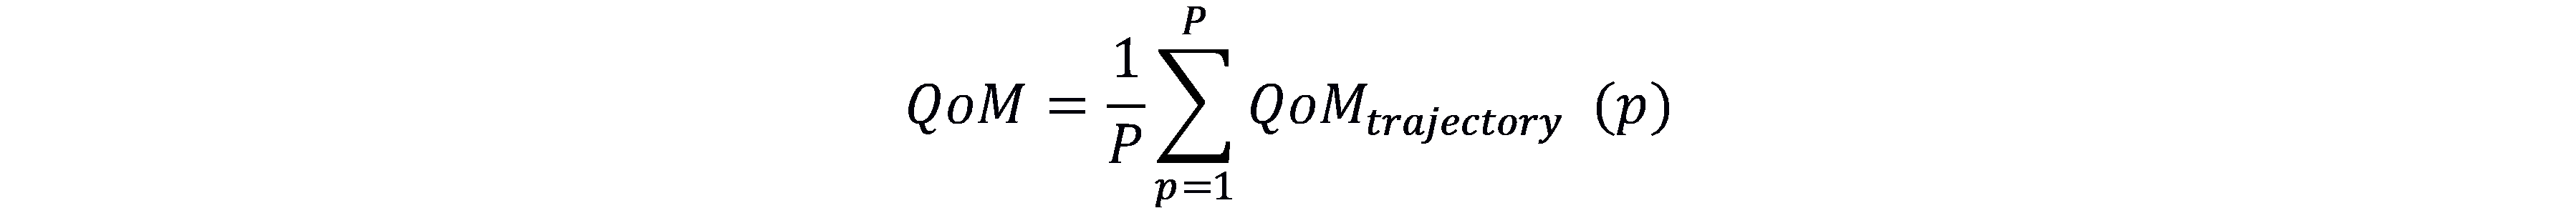 Image showing the the equation used to calculate the global quantity of motion of all trajectories